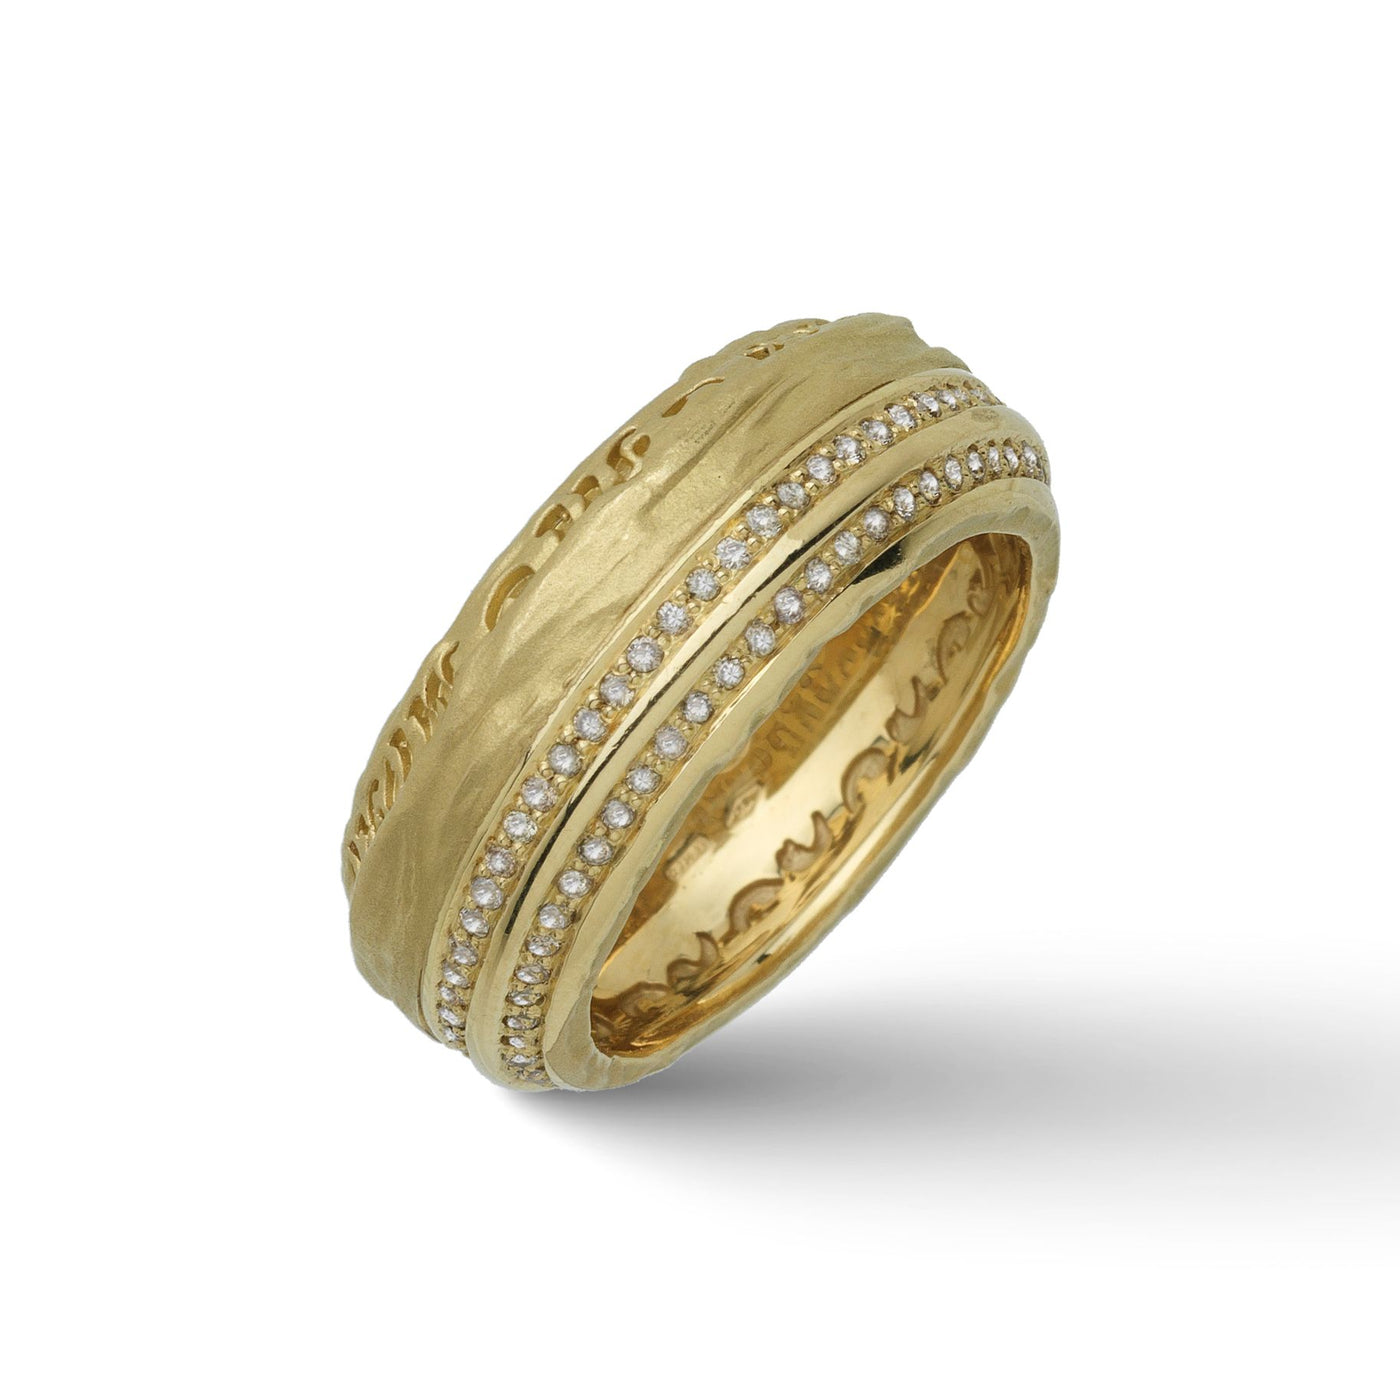 The Other Half Ring with Champagne Diamonds with 18kt Yellow Gold